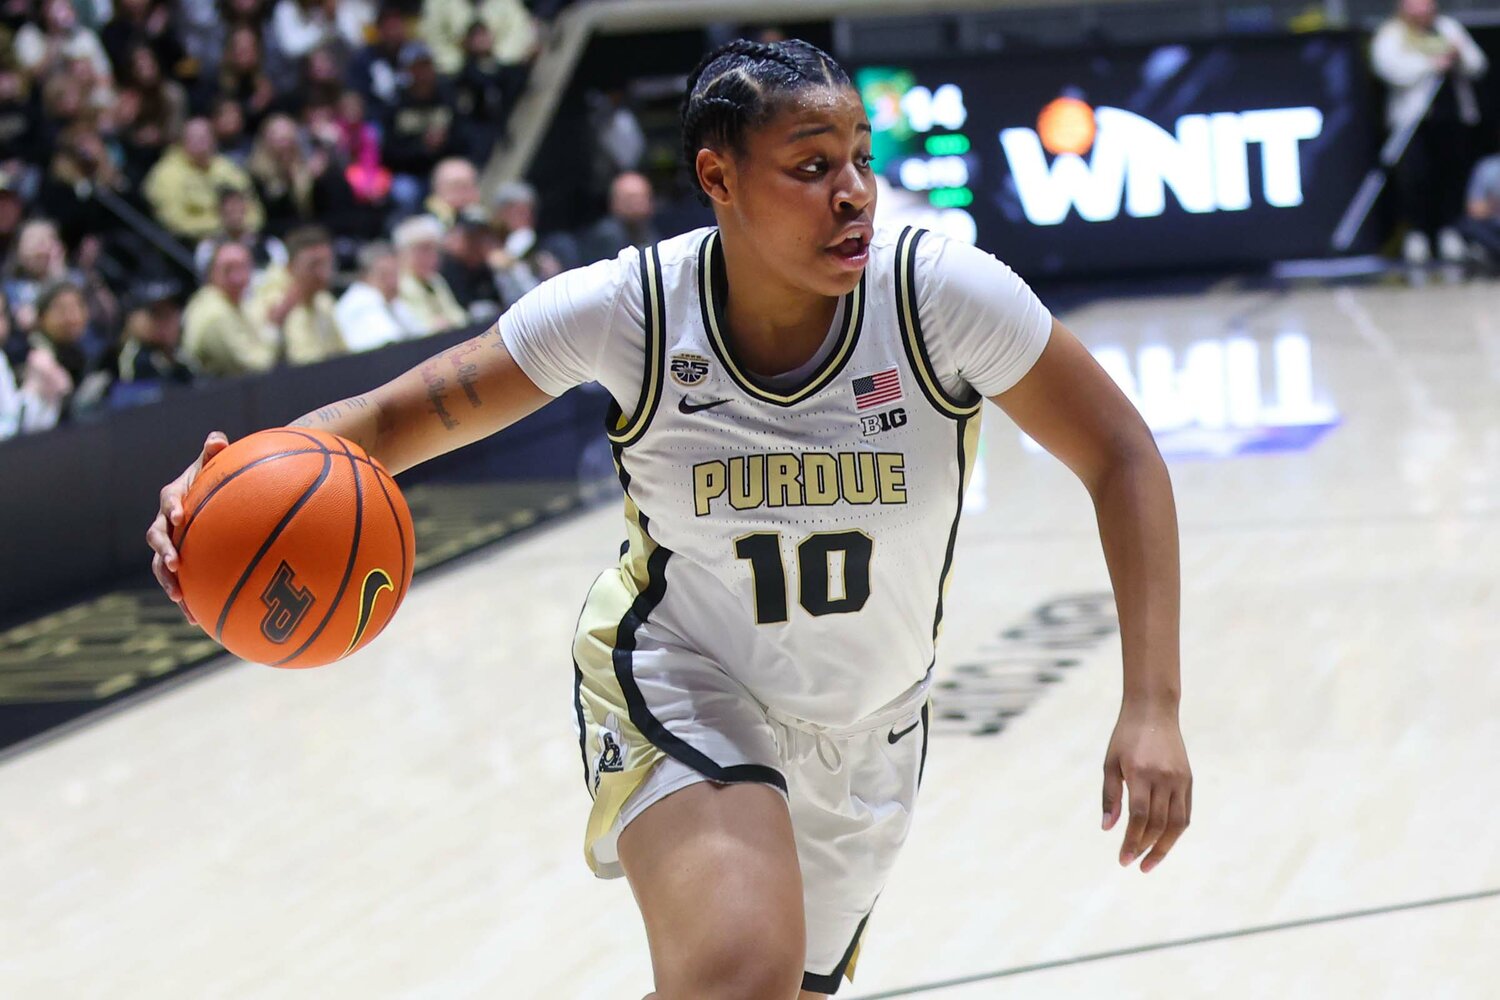 Jeanae Terry of Purdue - driving toward the basket in a game versus Vermont where she set the Purdue single-season assist record.